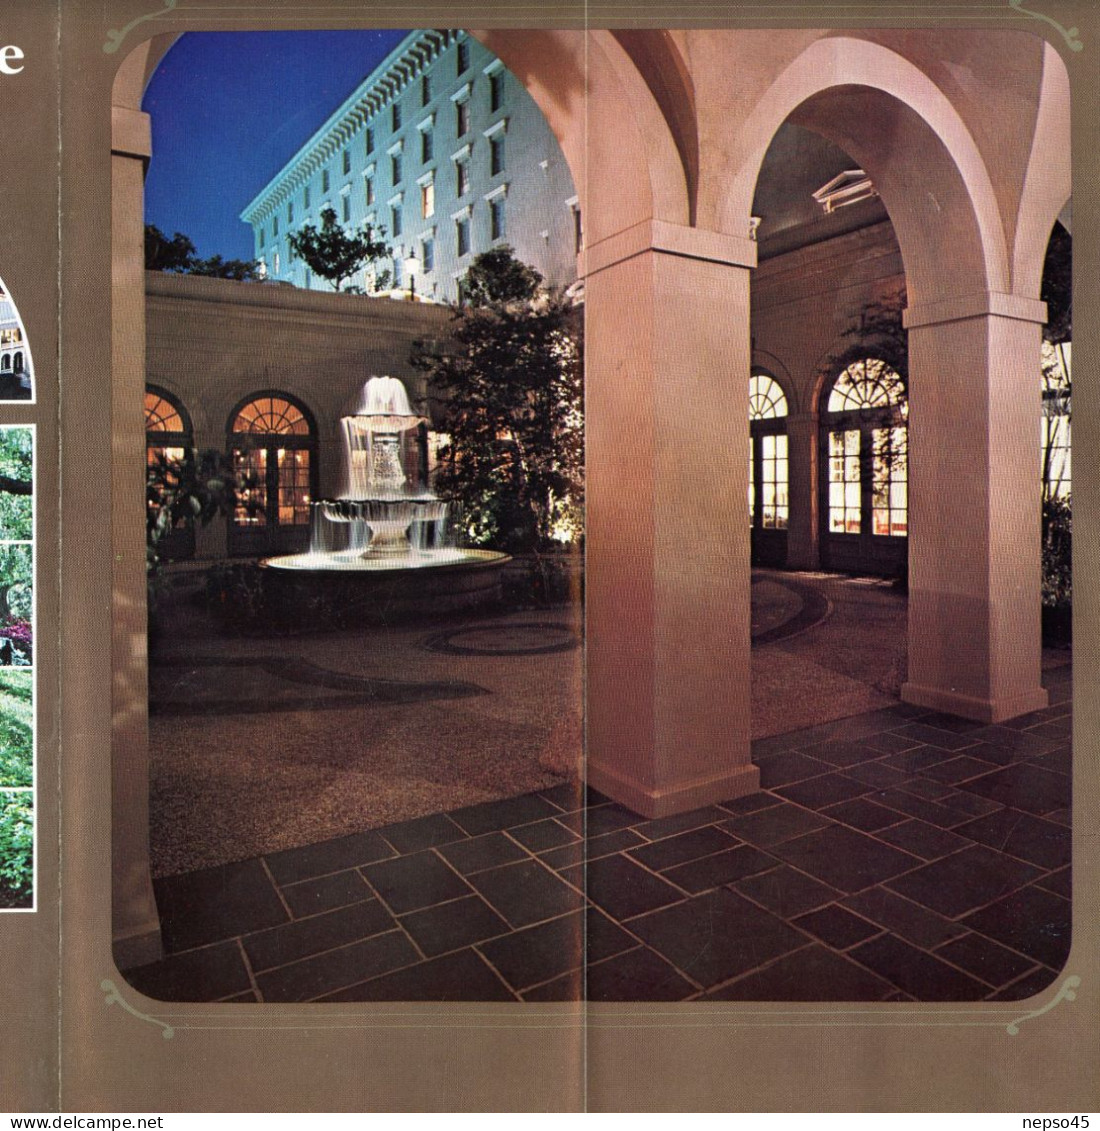 Dépliant Touristique.Mills Hyatt House.Charleston South California.29401.U.S.A.Meeting And Queen Streets. - Tourism Brochures